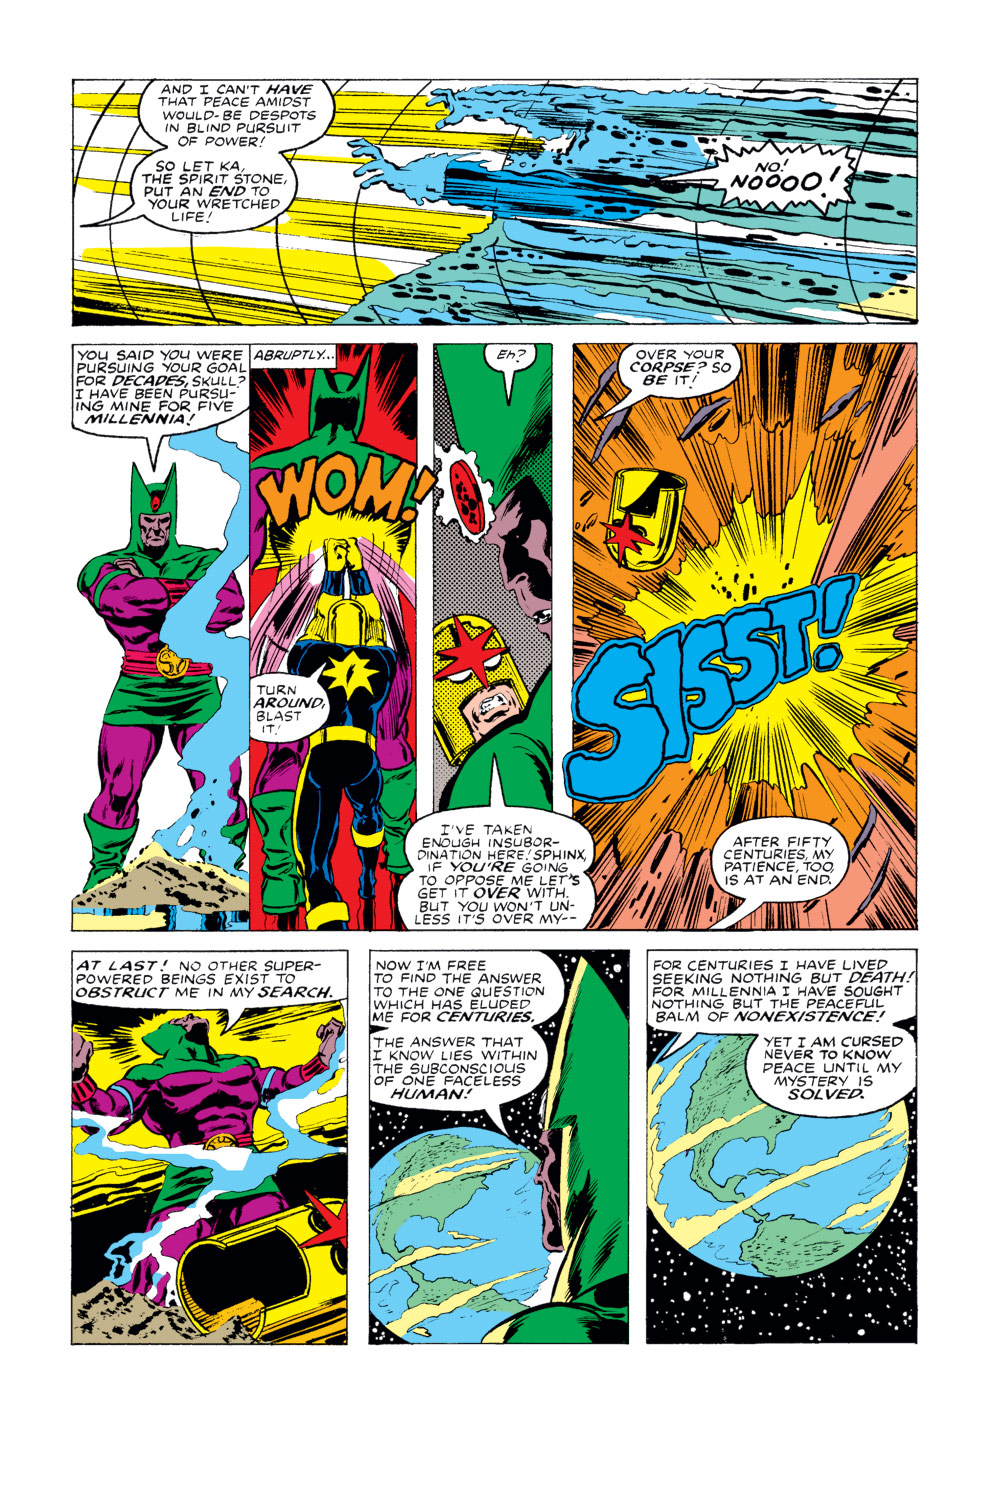 What If? (1977) issue 15 - Nova had been four other people - Page 33